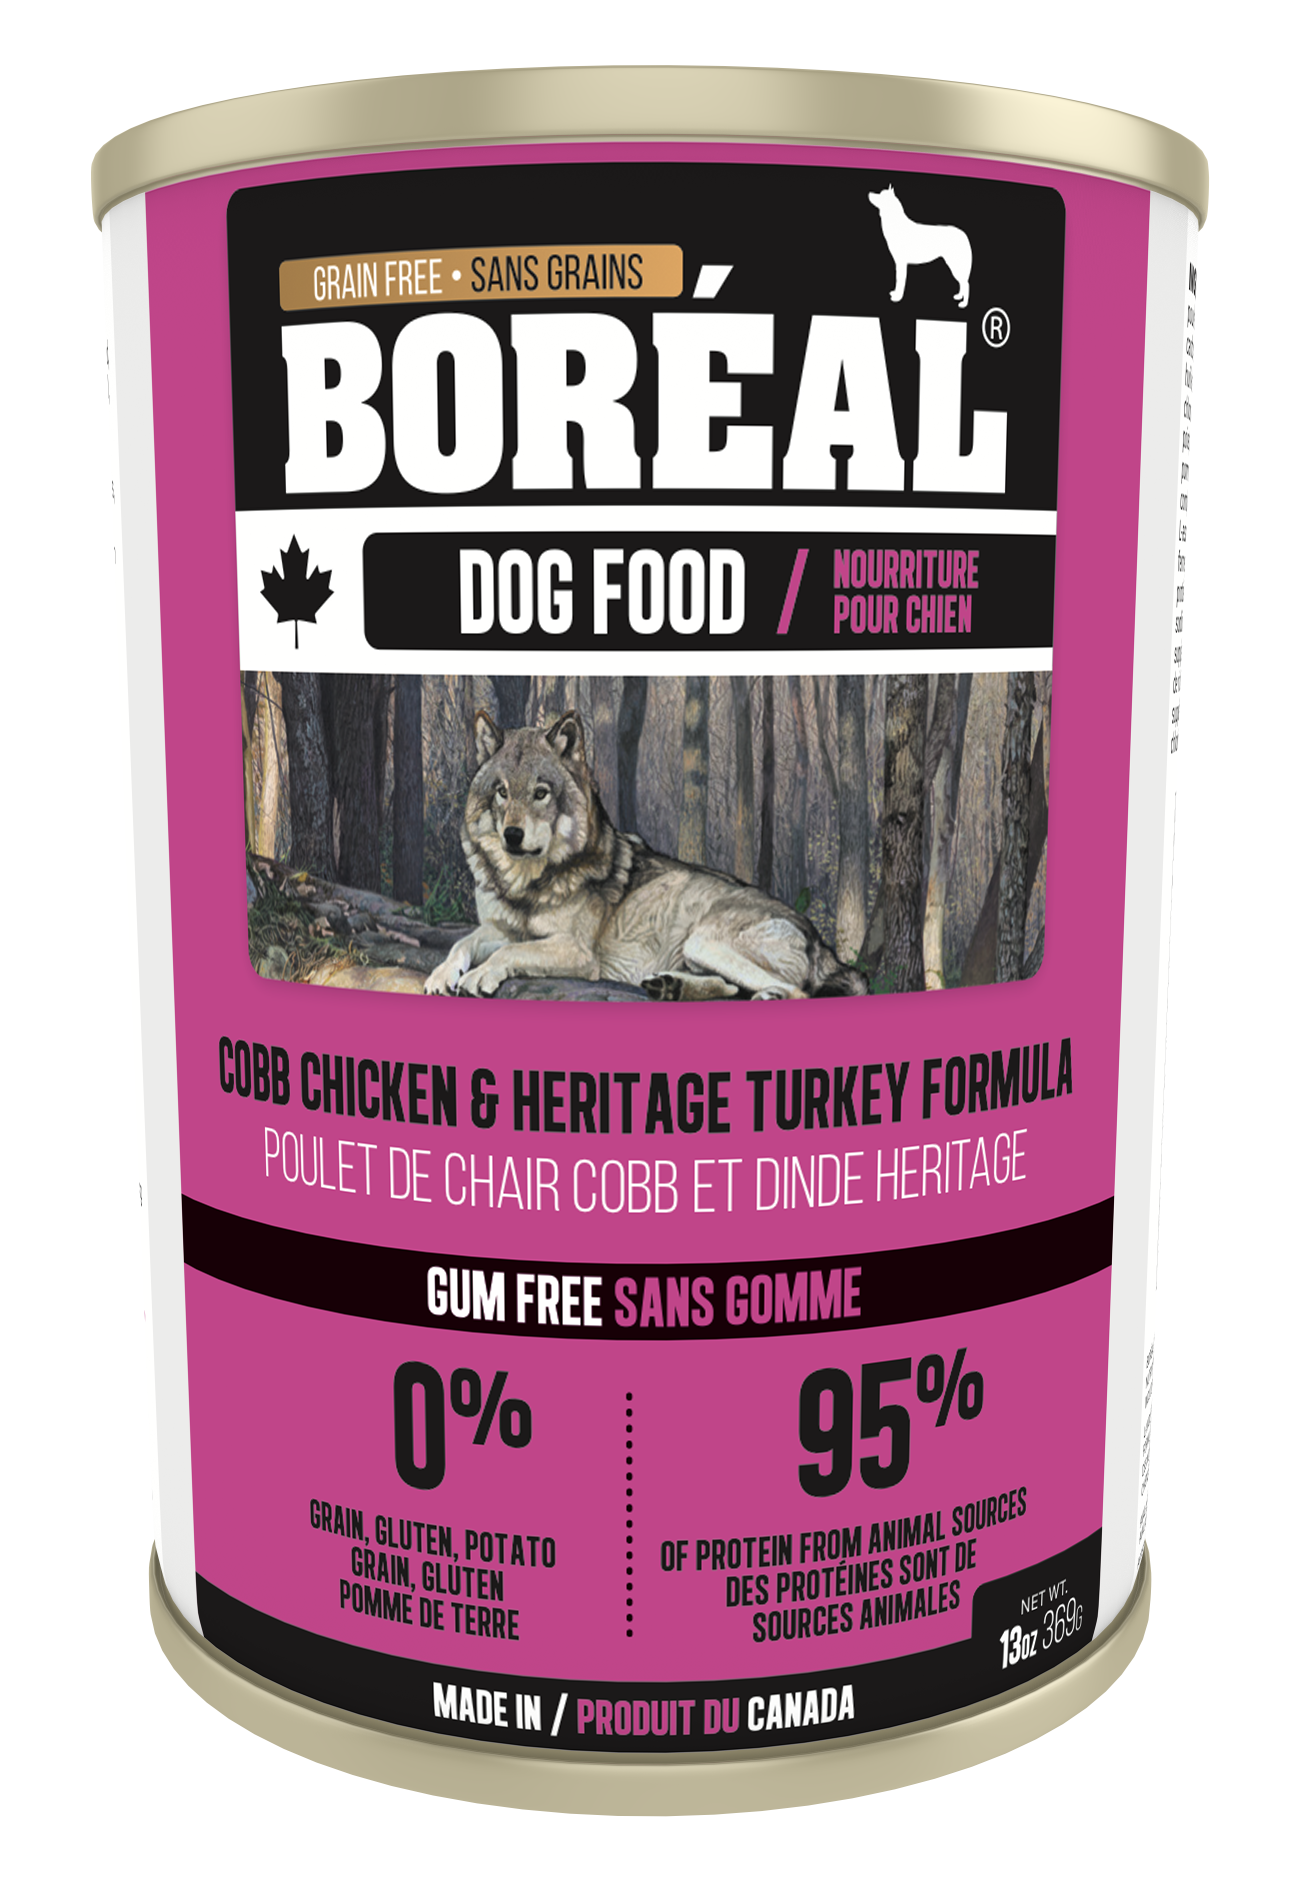 BOREAL CANADIAN COBB CHICKEN AND HERITAGE TURKEY